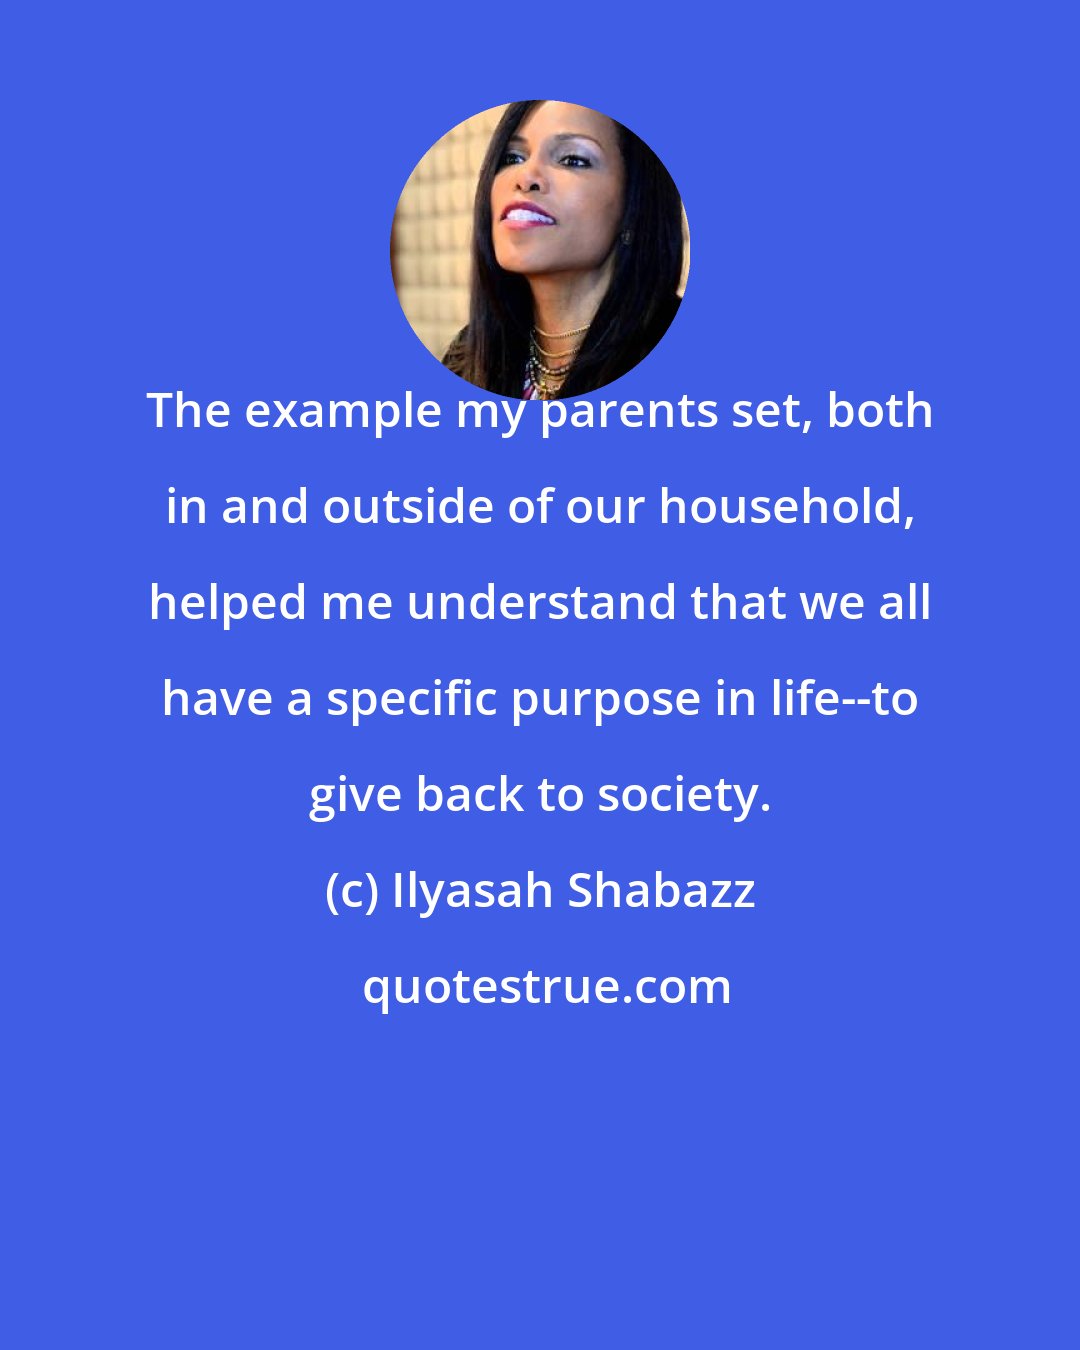 Ilyasah Shabazz: The example my parents set, both in and outside of our household, helped me understand that we all have a specific purpose in life--to give back to society.